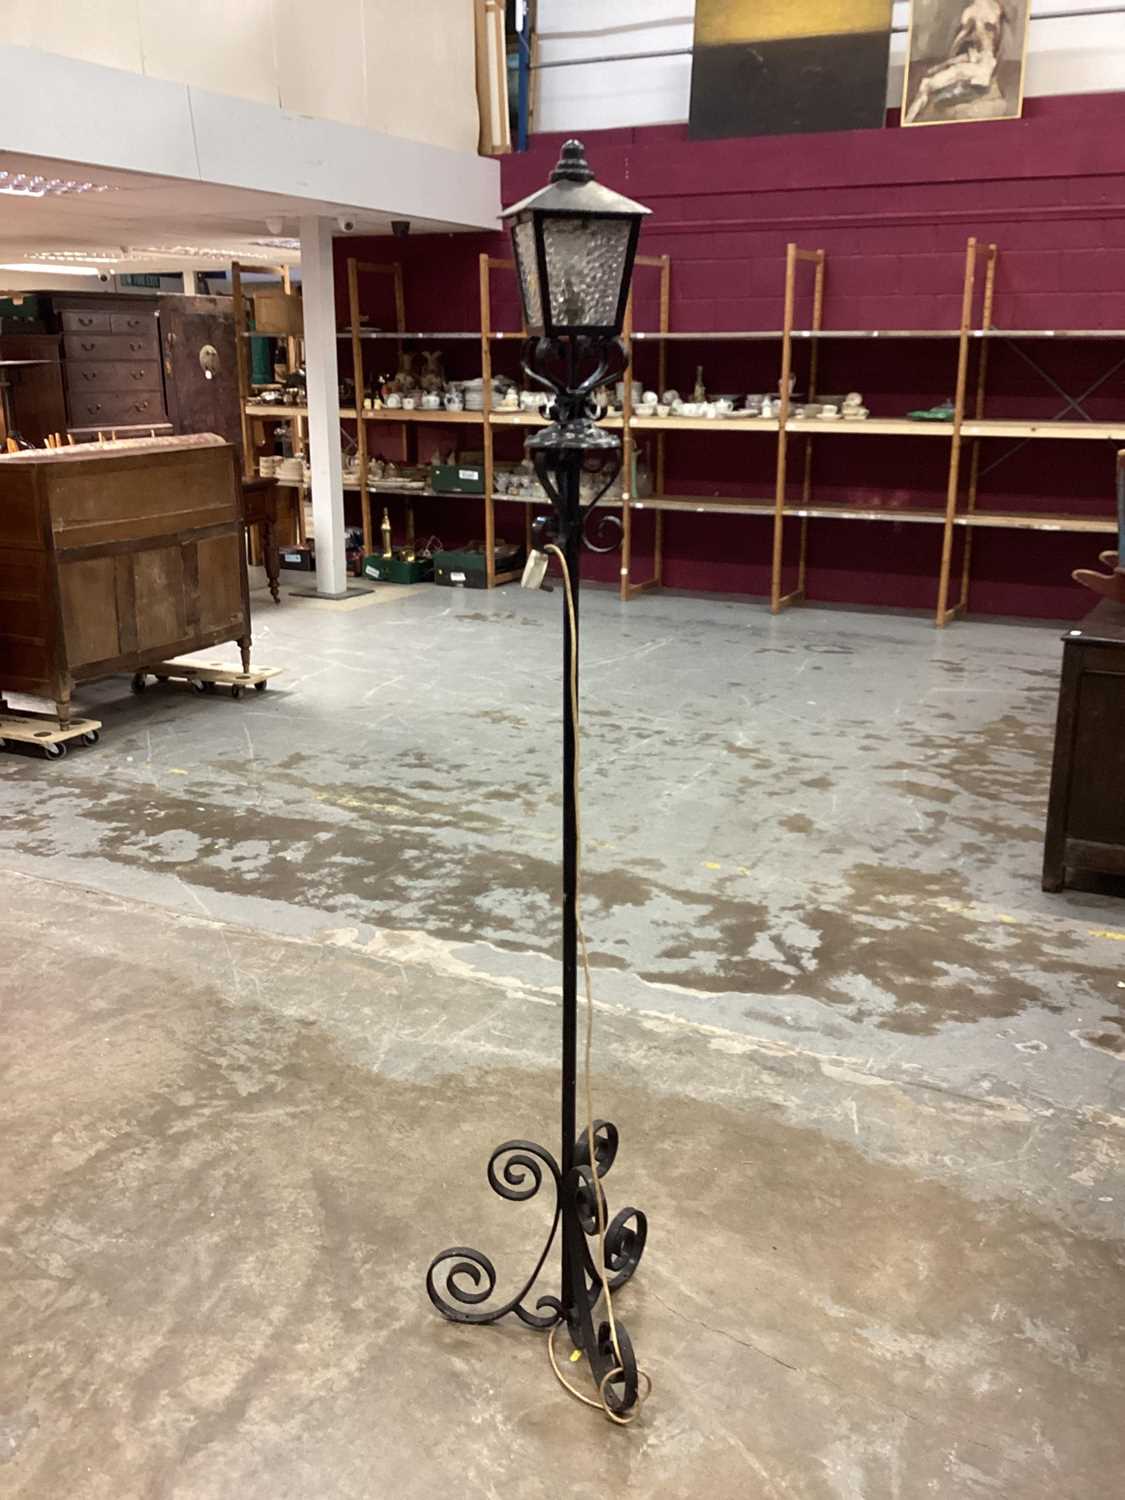 Wrought iron standard lamp in the form of a Victorian street light